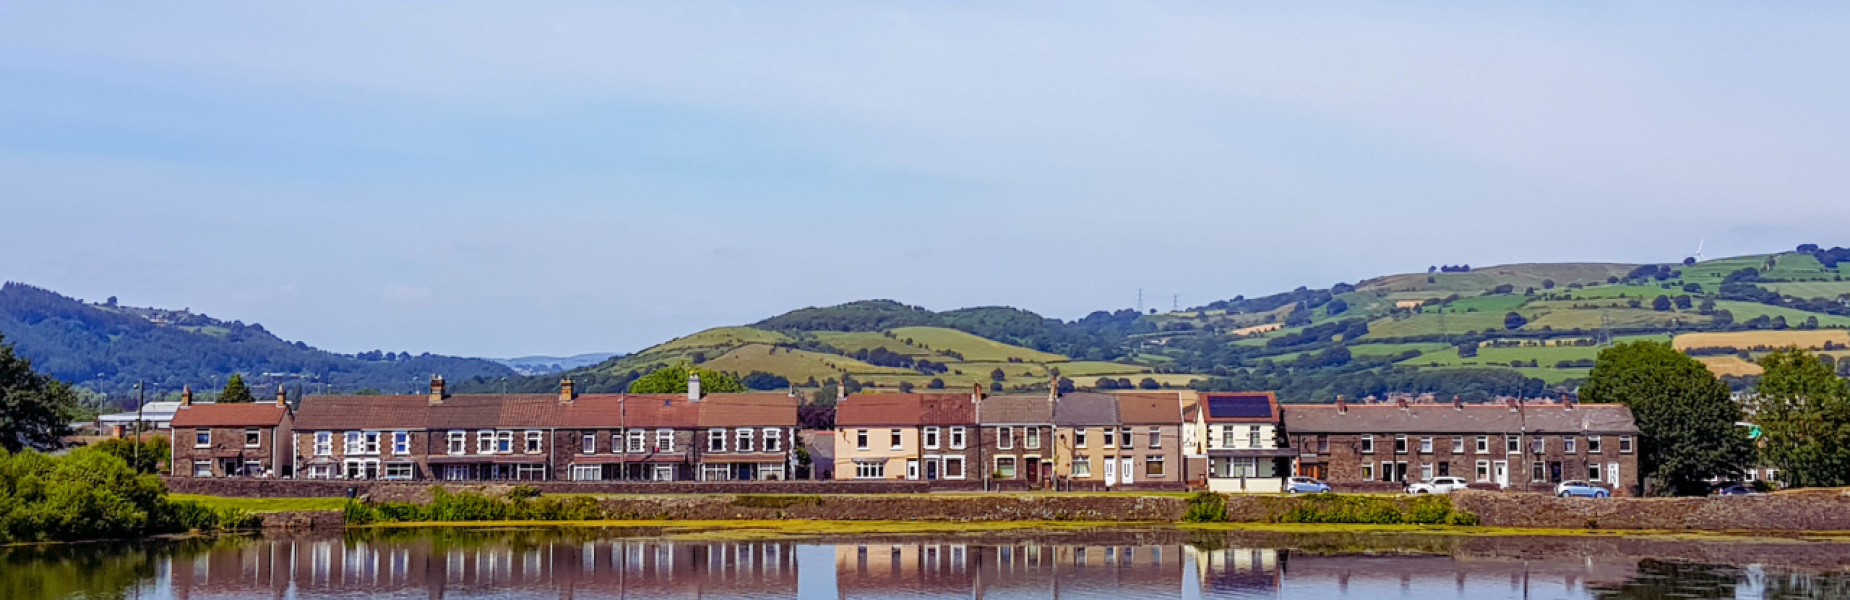 Caerphilly town houses